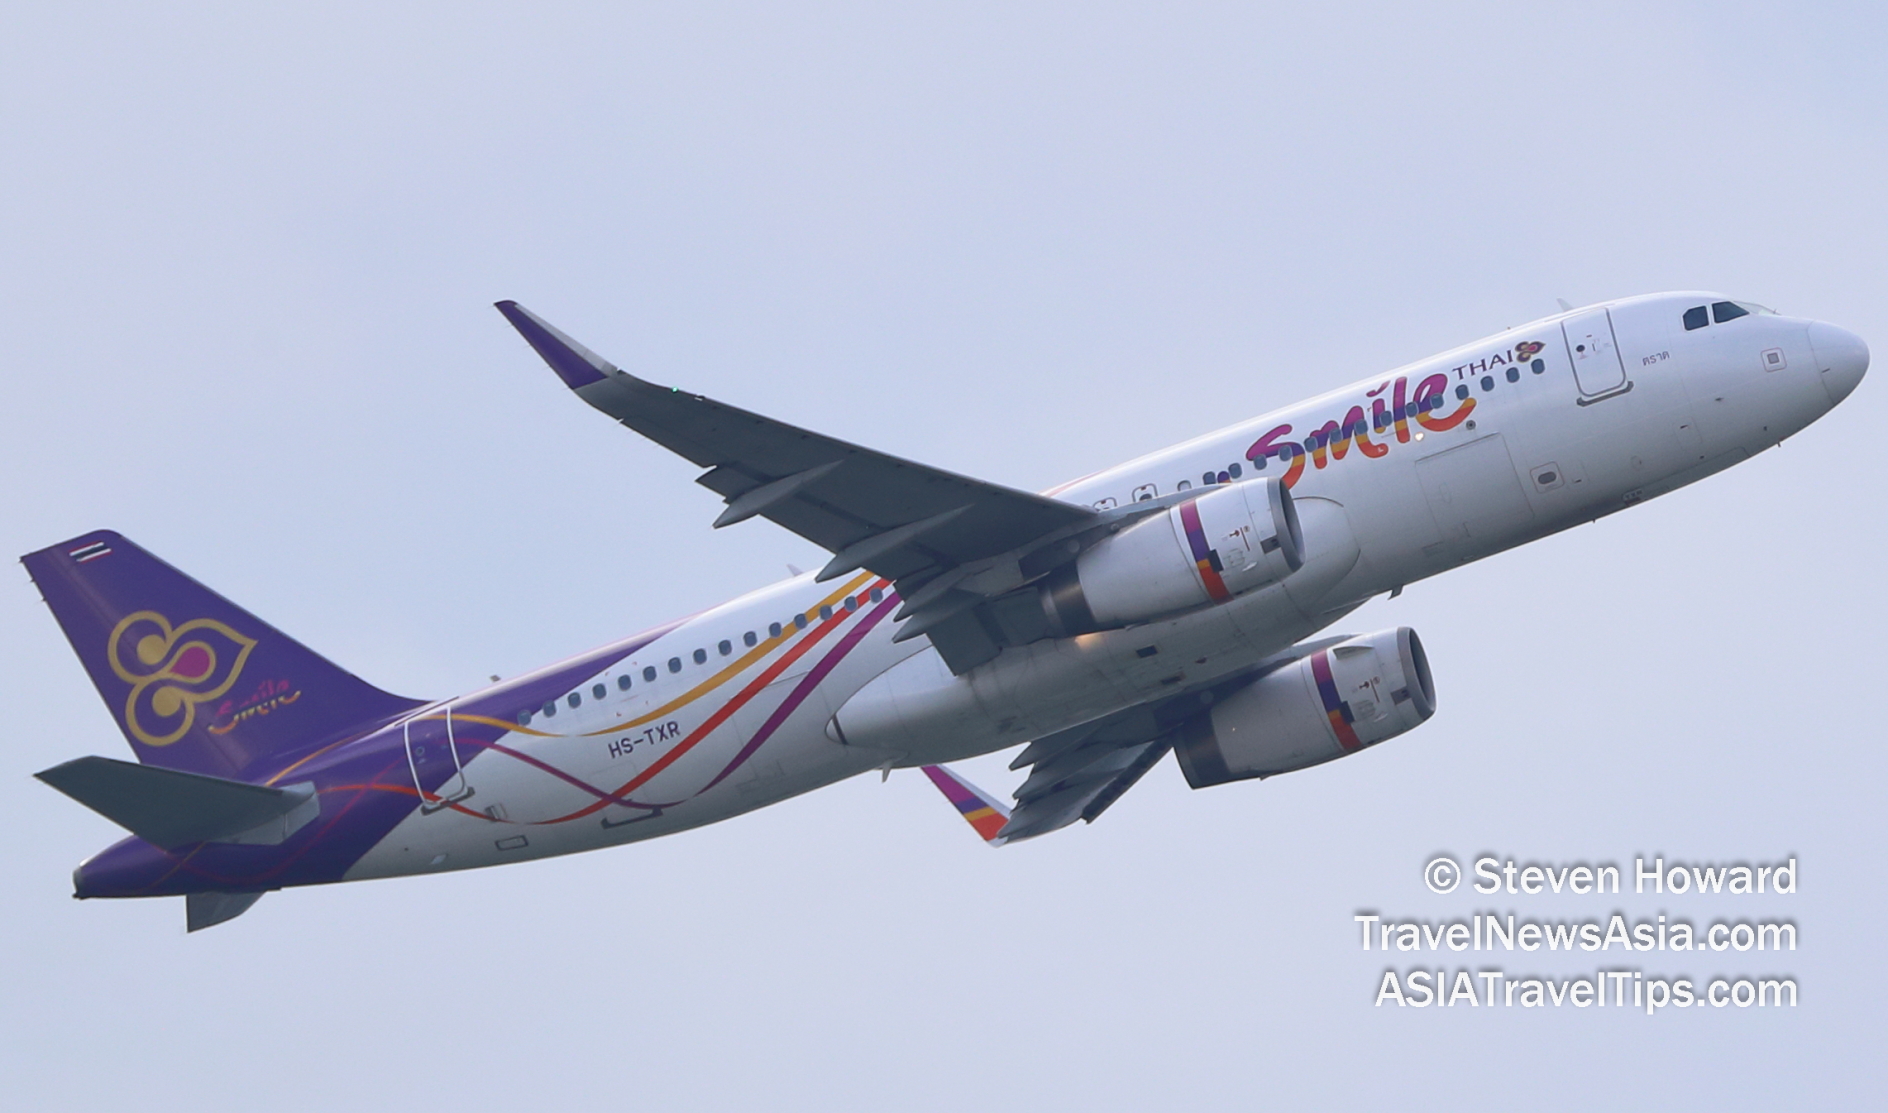 Thai Smile A320 reg: HS-TXR. Picture by Steven Howard of TravelNewsAsia.com Click to enlarge.